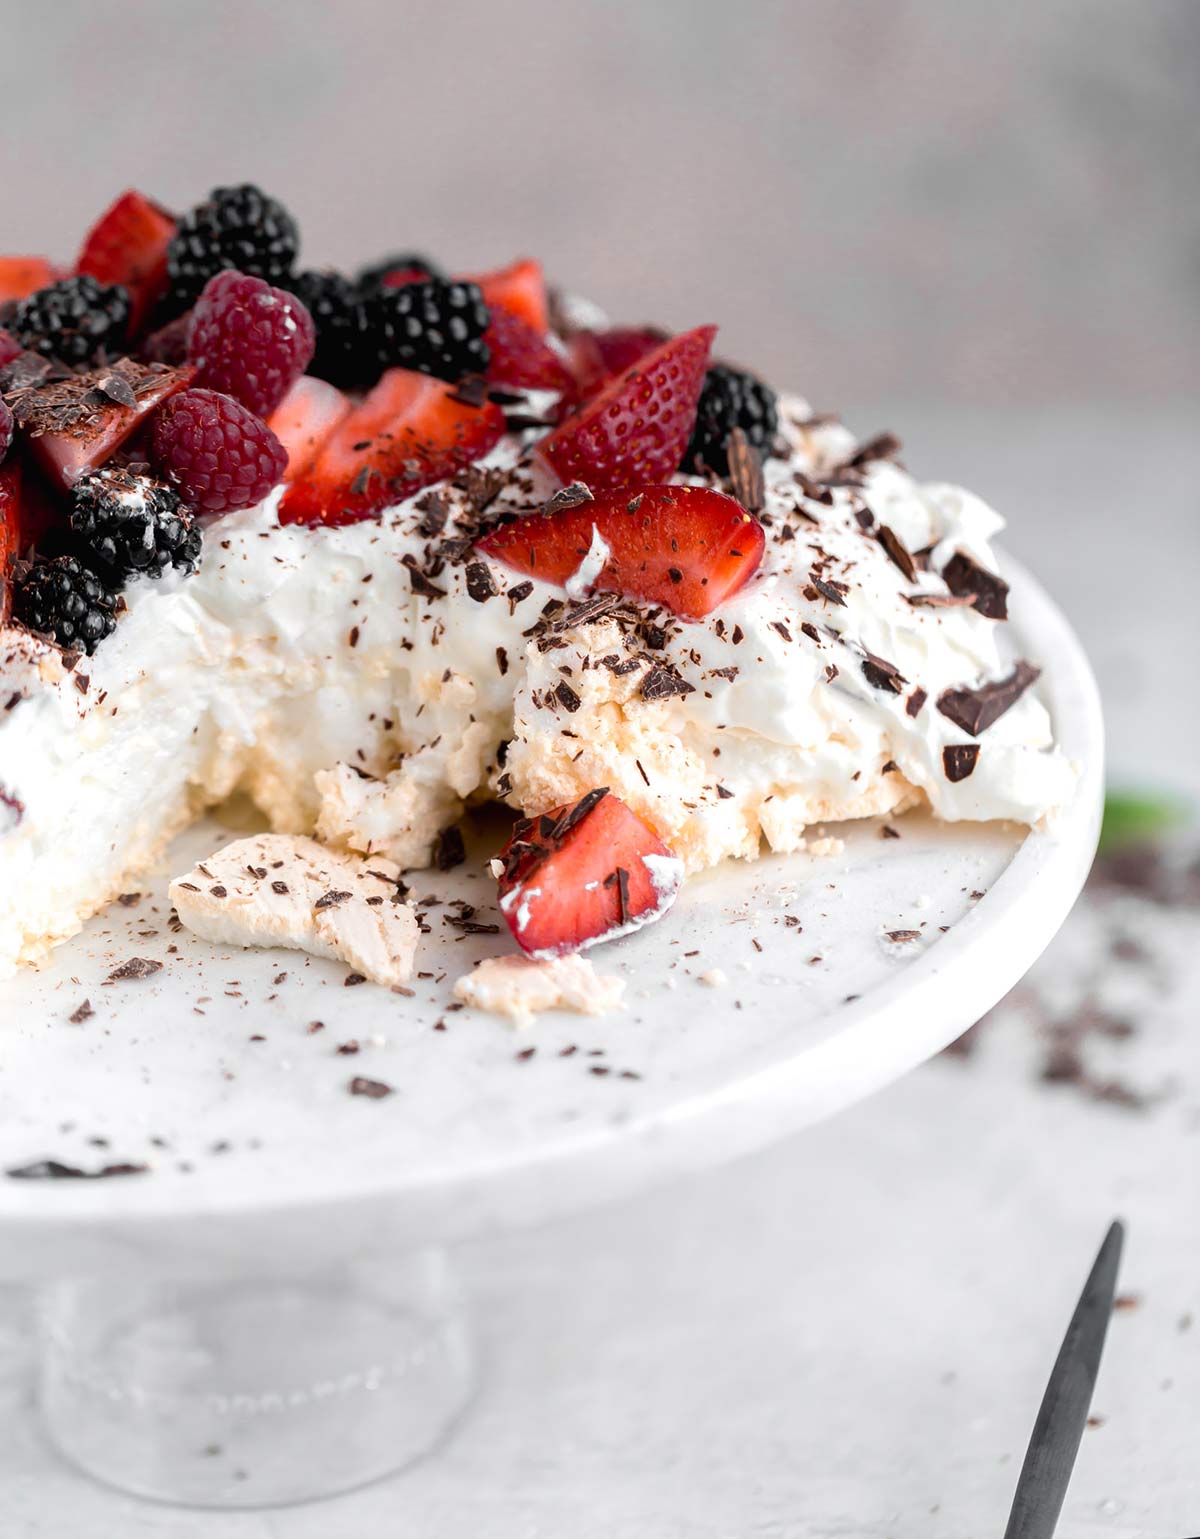 A side view of this classic Pavlova recipe served on a glass cake stand with whipped cream and berries with a sliced removed